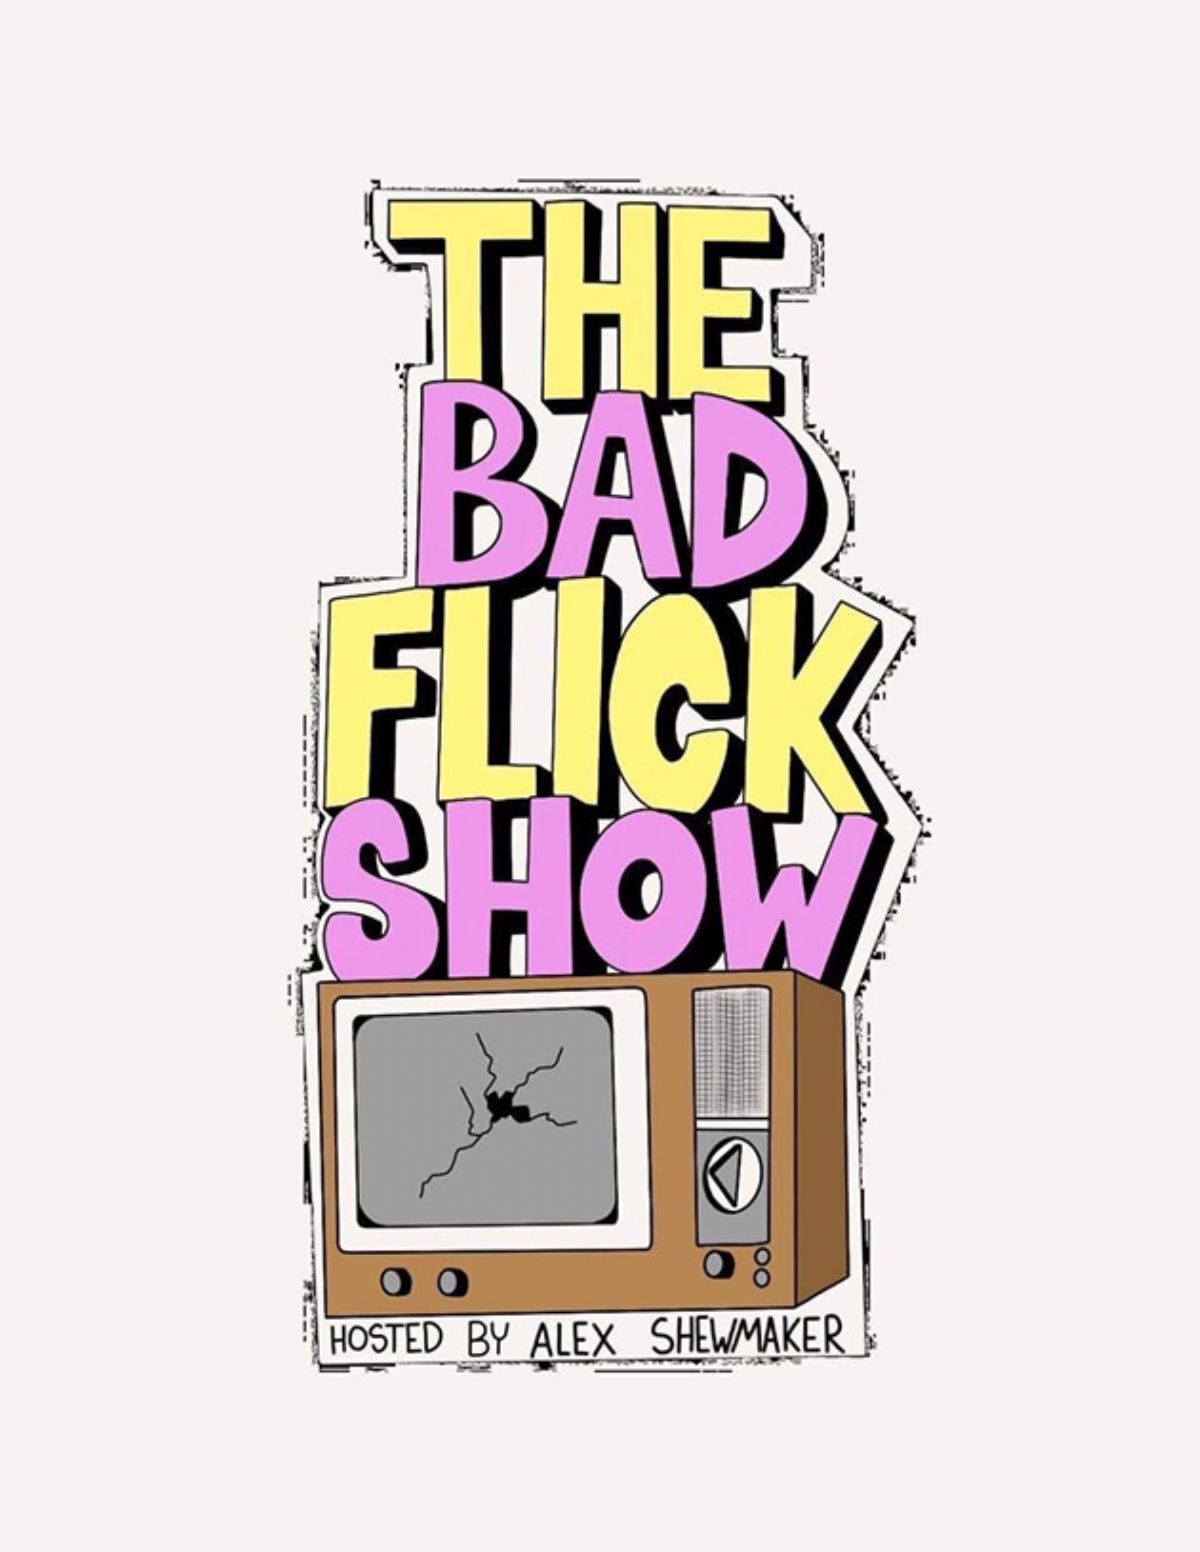 The Bad Flick Show